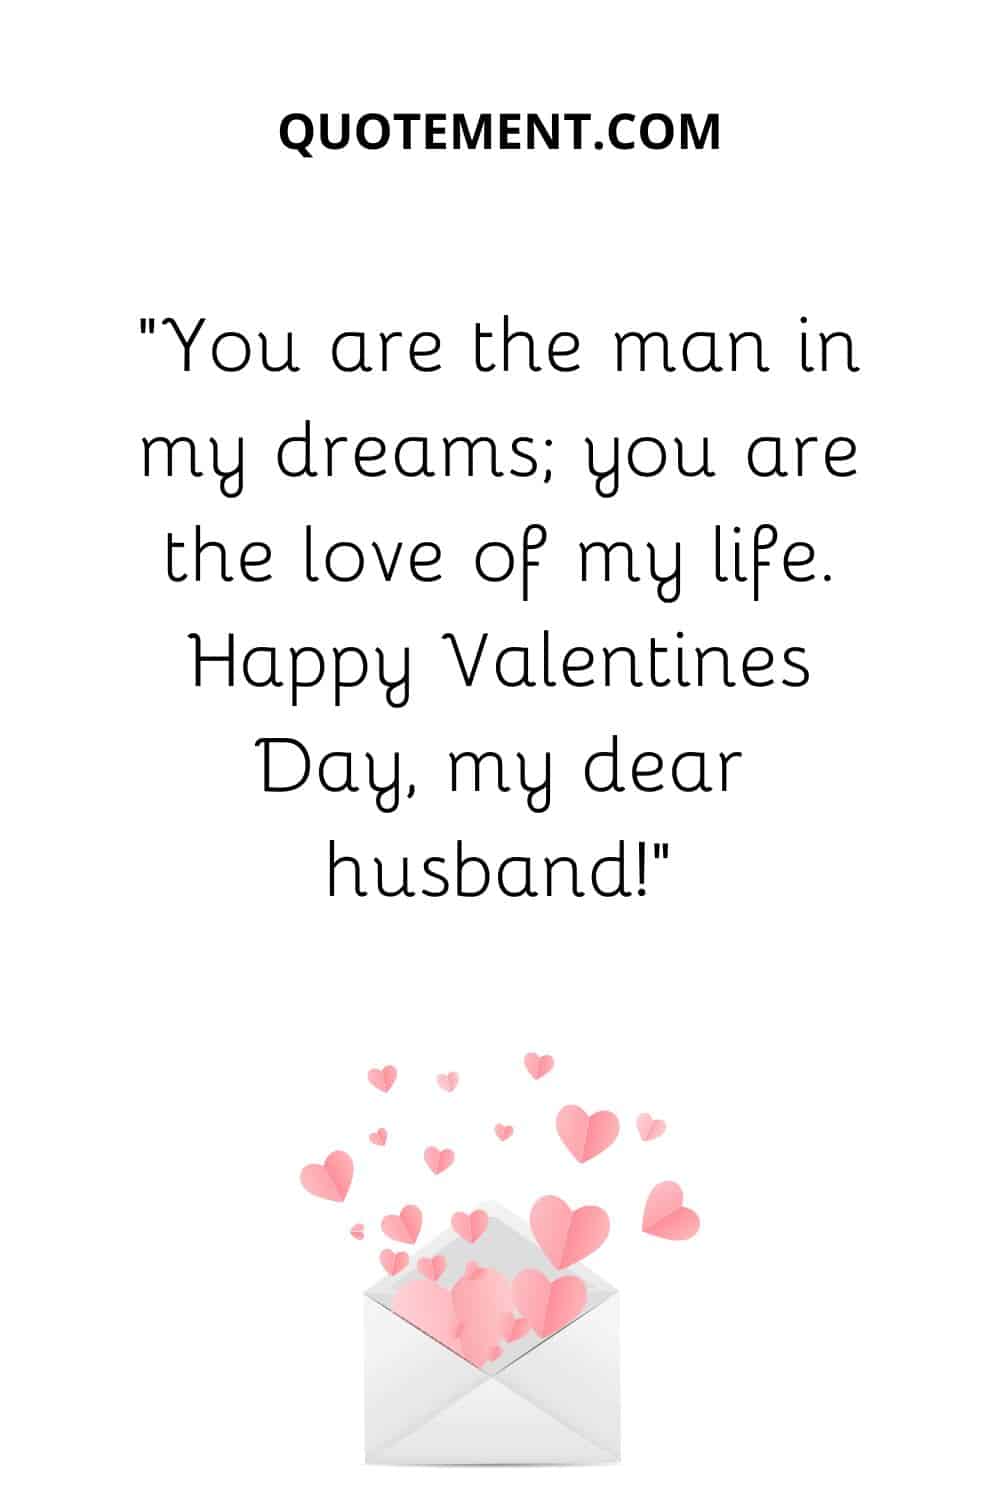 “You are the man in my dreams; you are the love of my life. Happy Valentines Day, my dear husband!”